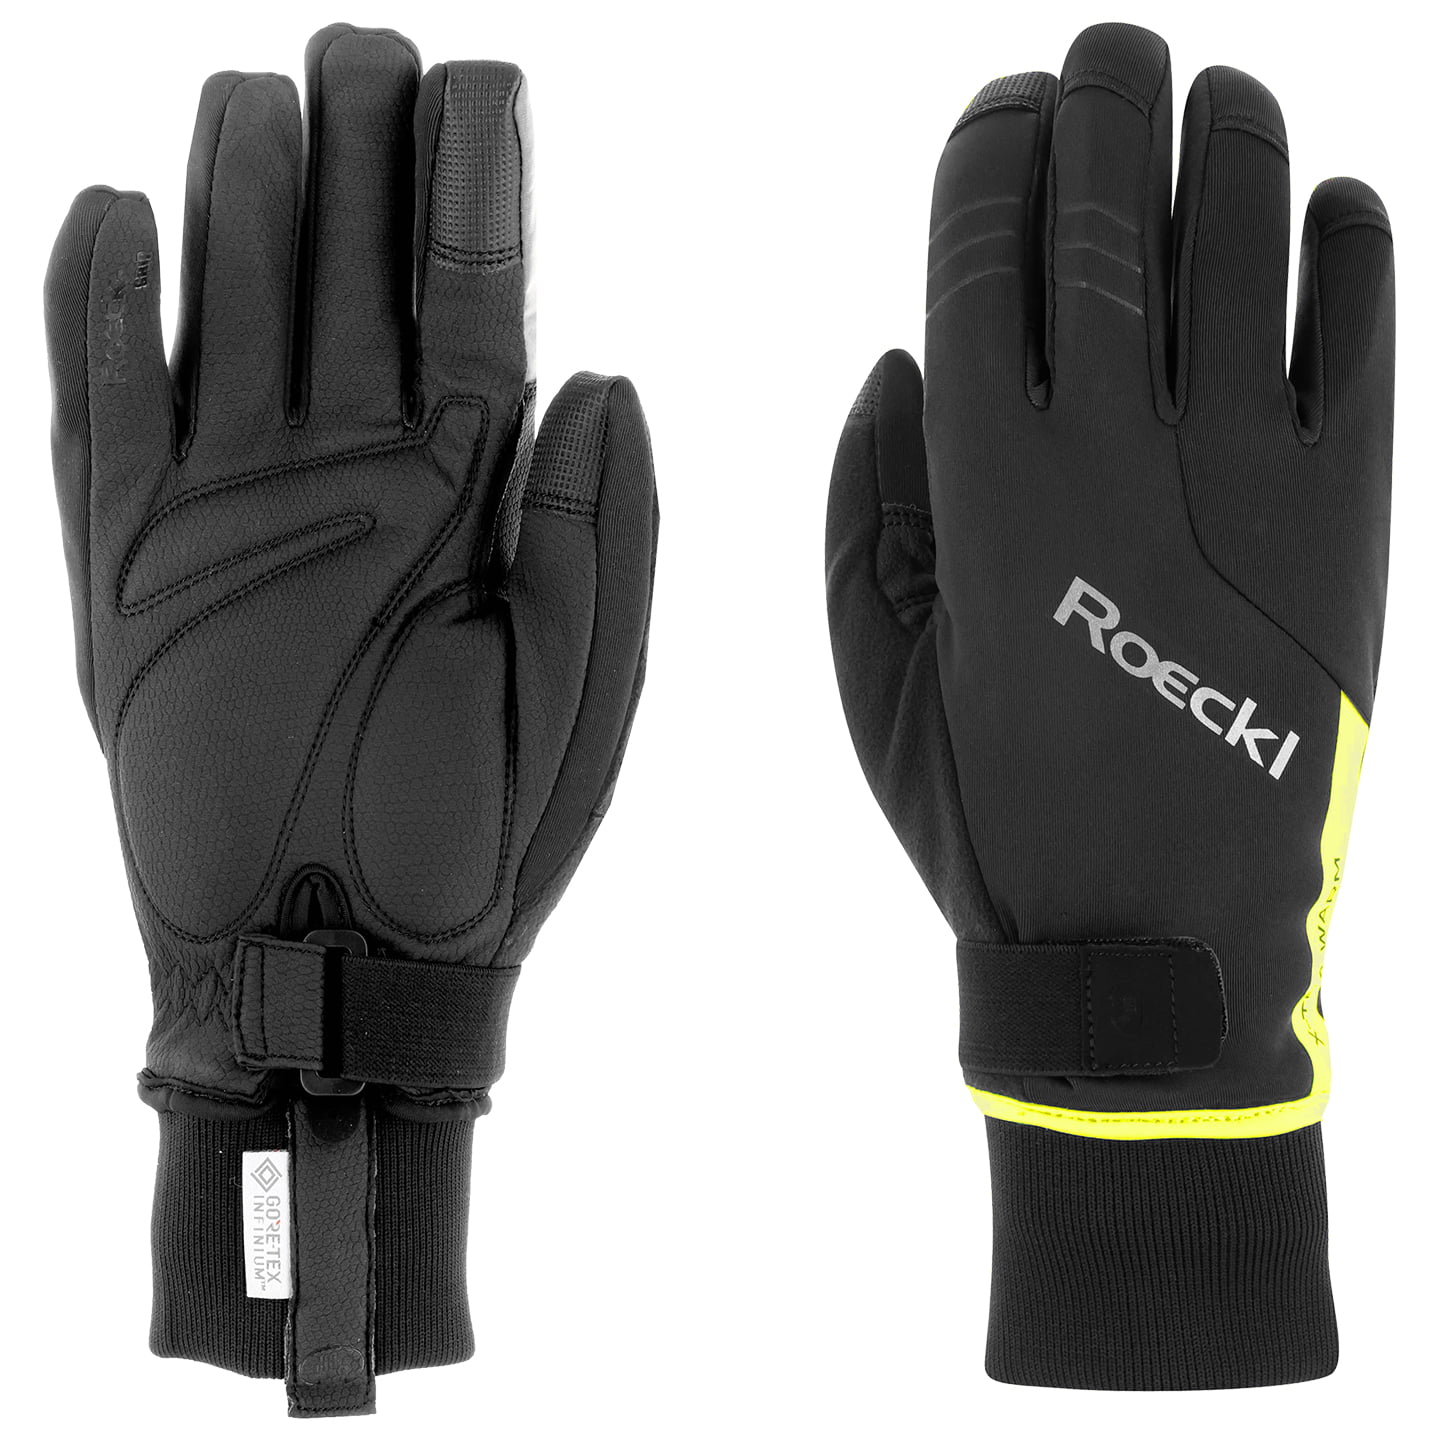 ROECKL Villach 2 Winter Gloves Winter Cycling Gloves, for men, size 9,5, Bike gloves, Cycling wear